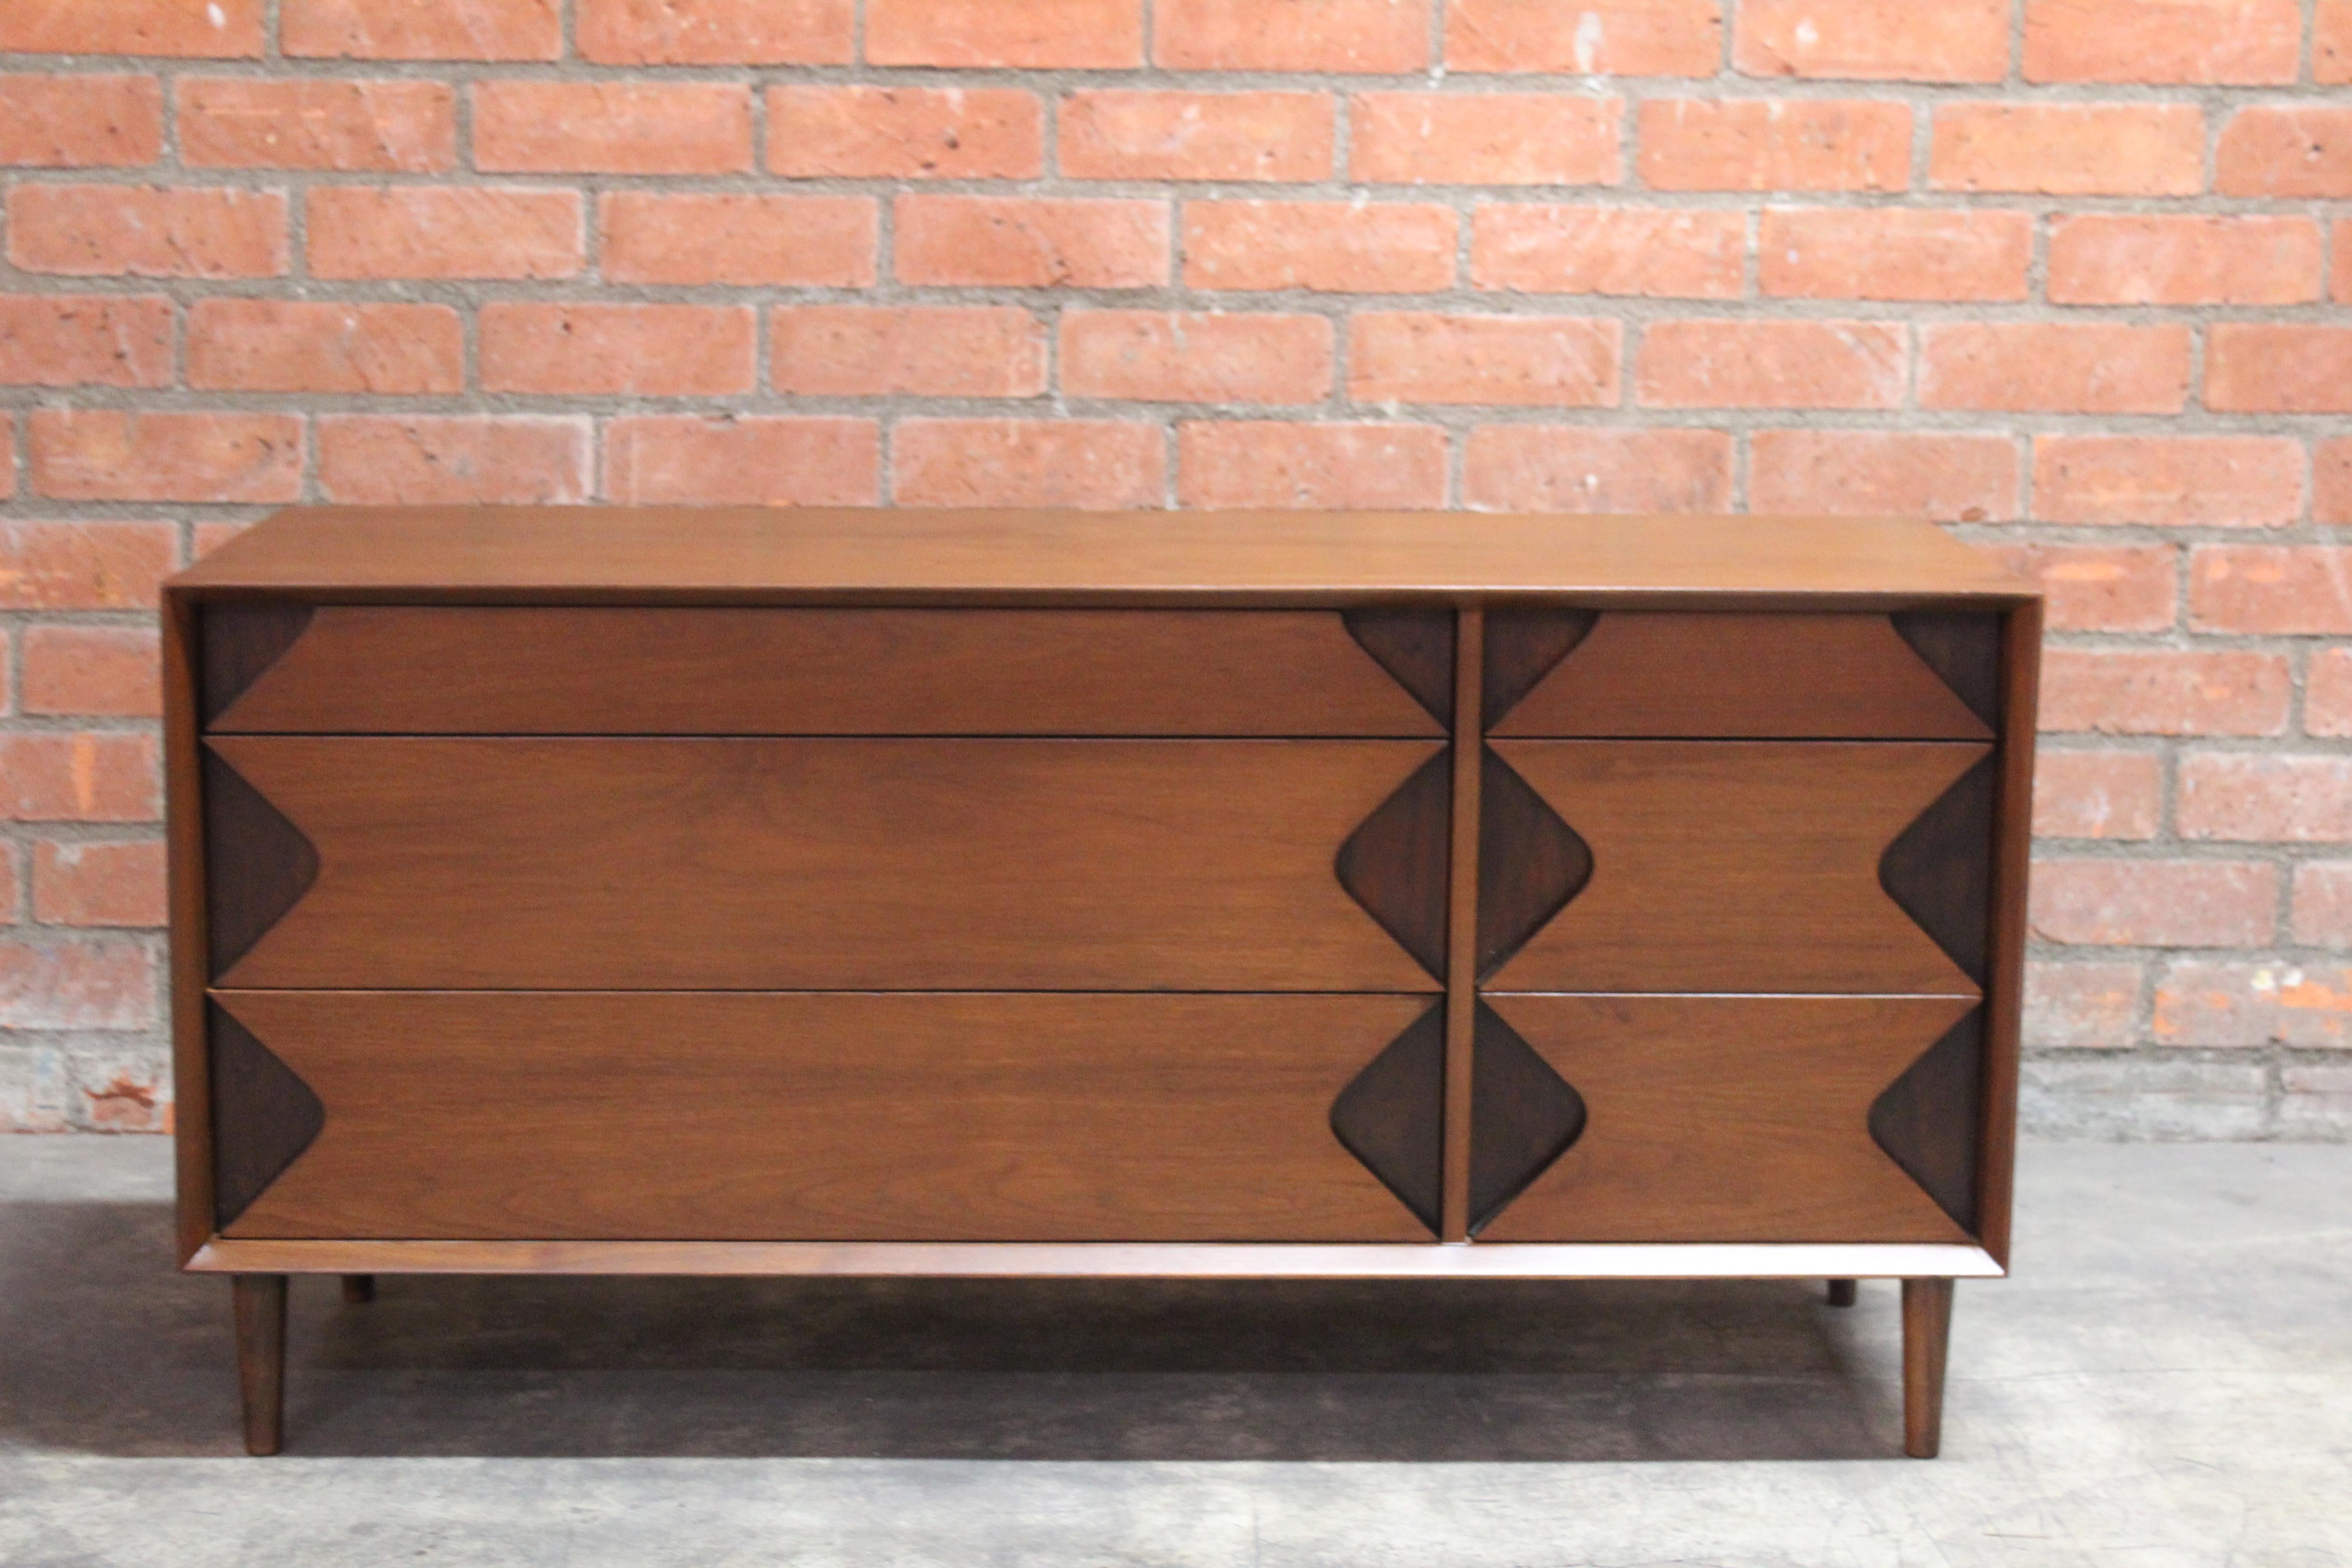 Vintage 1960s walnut dresser designed by Marc Berge for Grosfeld House. Features six drawers. It has been recently refinished and is in overall good condition. There are a few small areas where the walnut veneer was repaired on top, please see